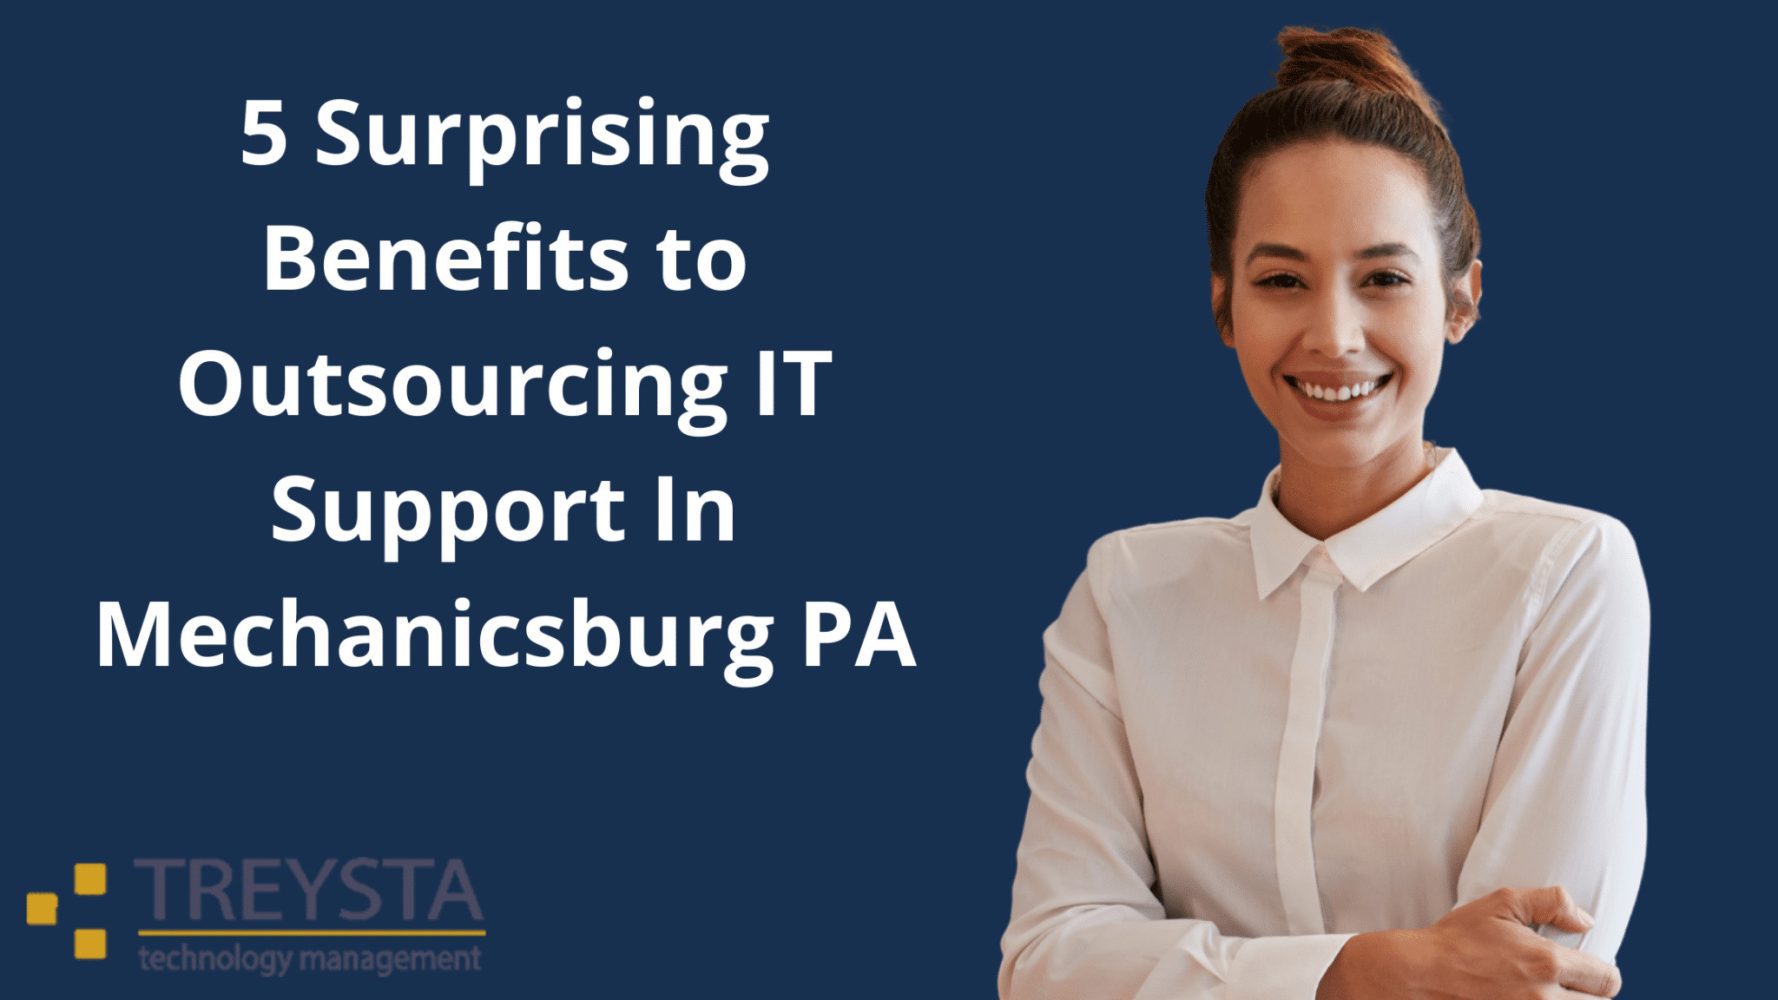 5 Surprising Benefits to Outsourcing IT Support In Mechanicsburg PA